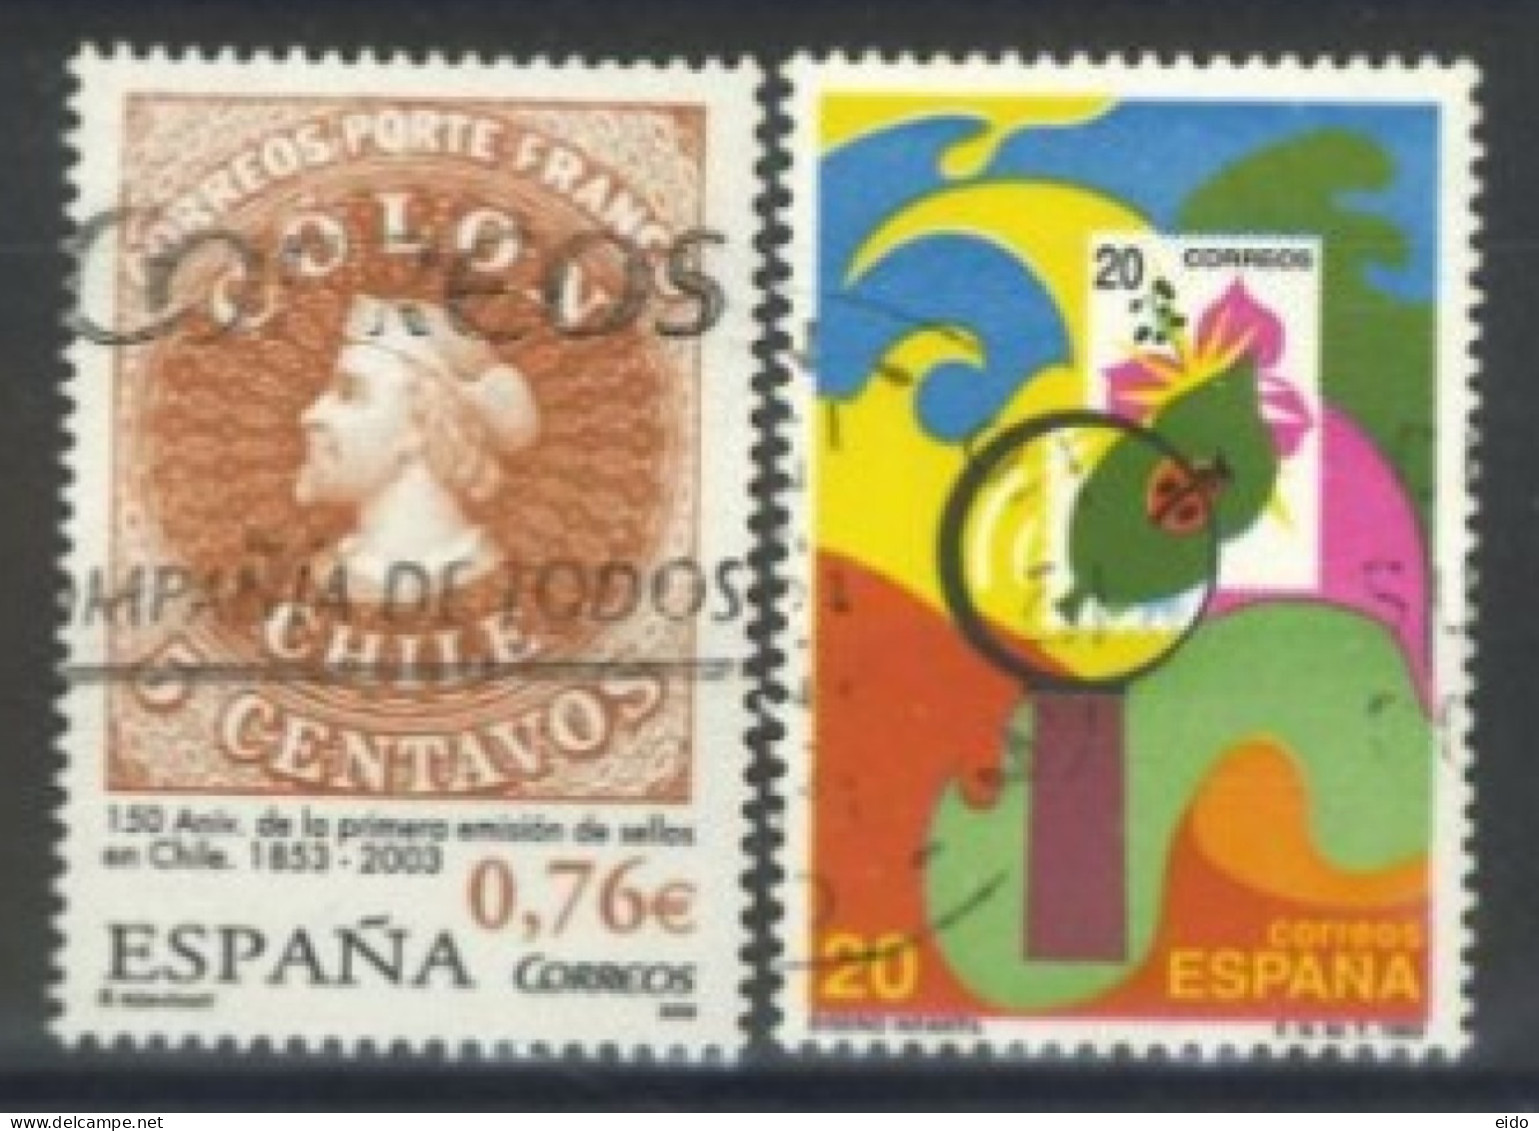 SPAIN,1989/2003, STAMP COLLECTING & CHILEAN POSTAGE STAMPS SET OF 2, # 2592, 3227, USED. - Oblitérés